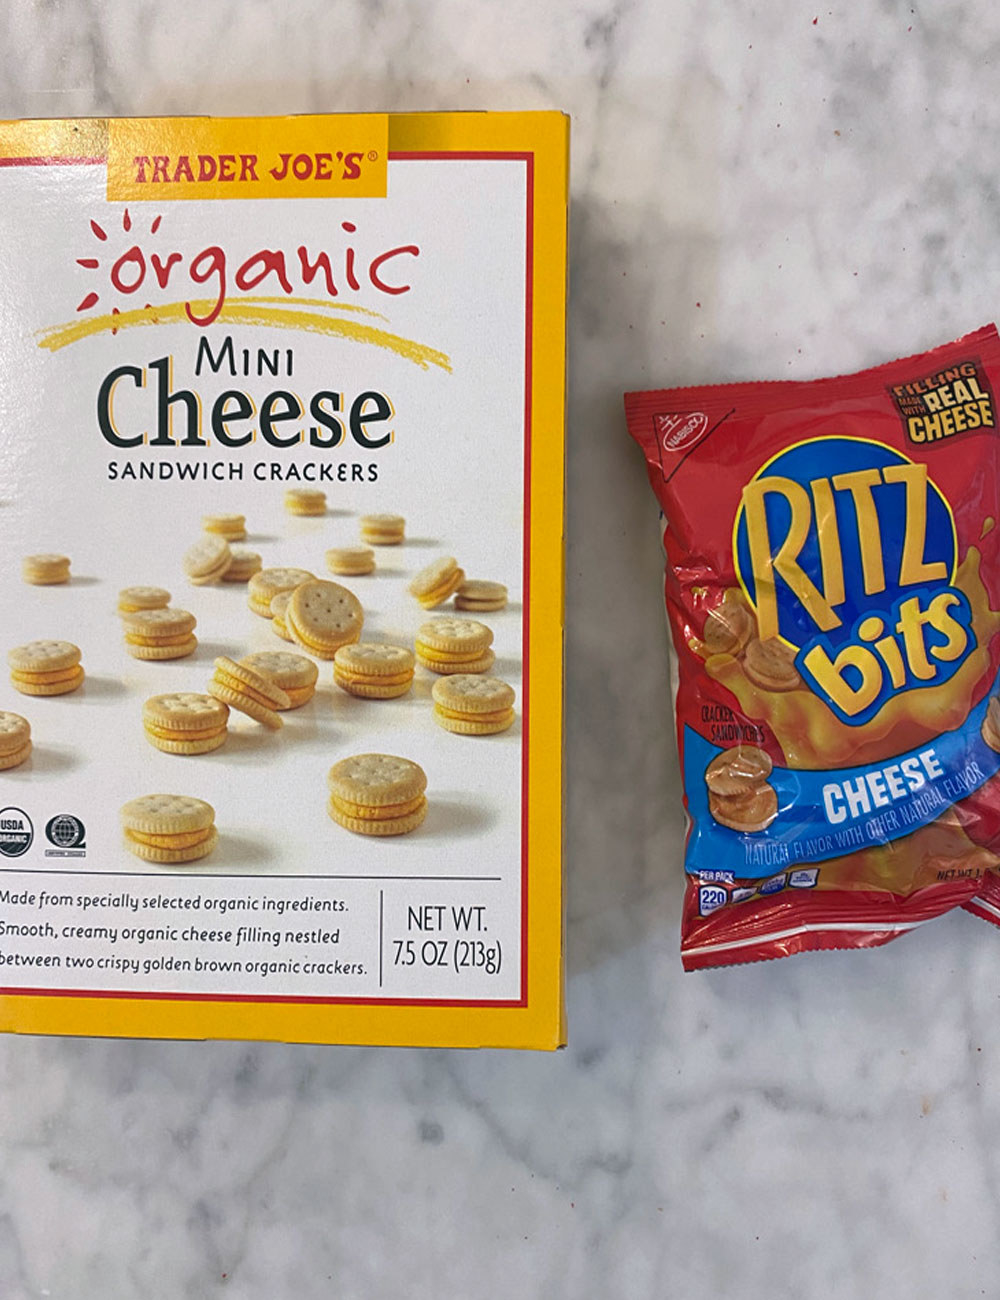 Mini Cheese Sandwich Crackers and Cheese Ritz Bits in packaging